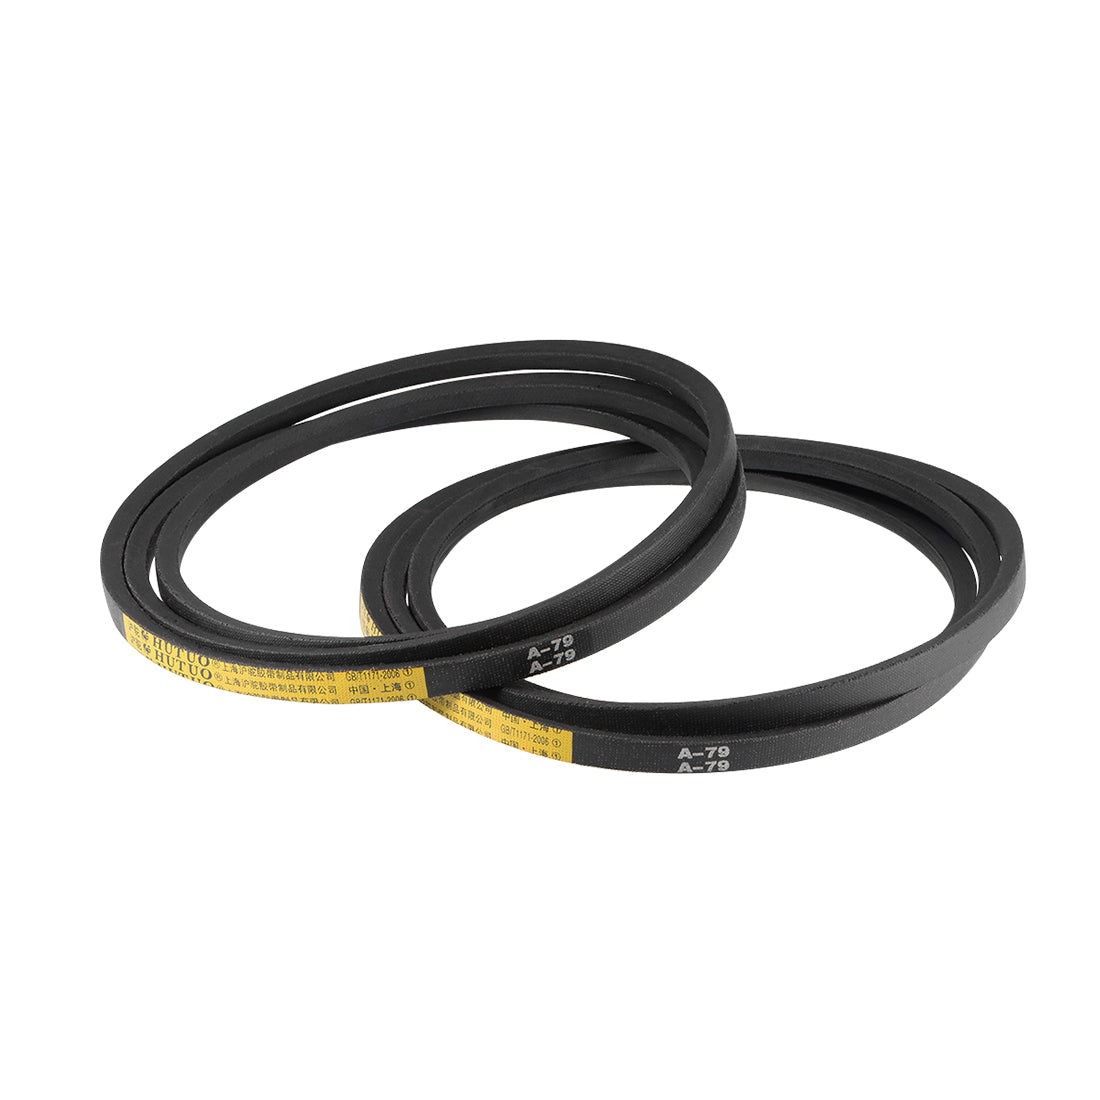 uxcell Uxcell V-Belts Pitch Length, A-Section Rubber Drive Belt